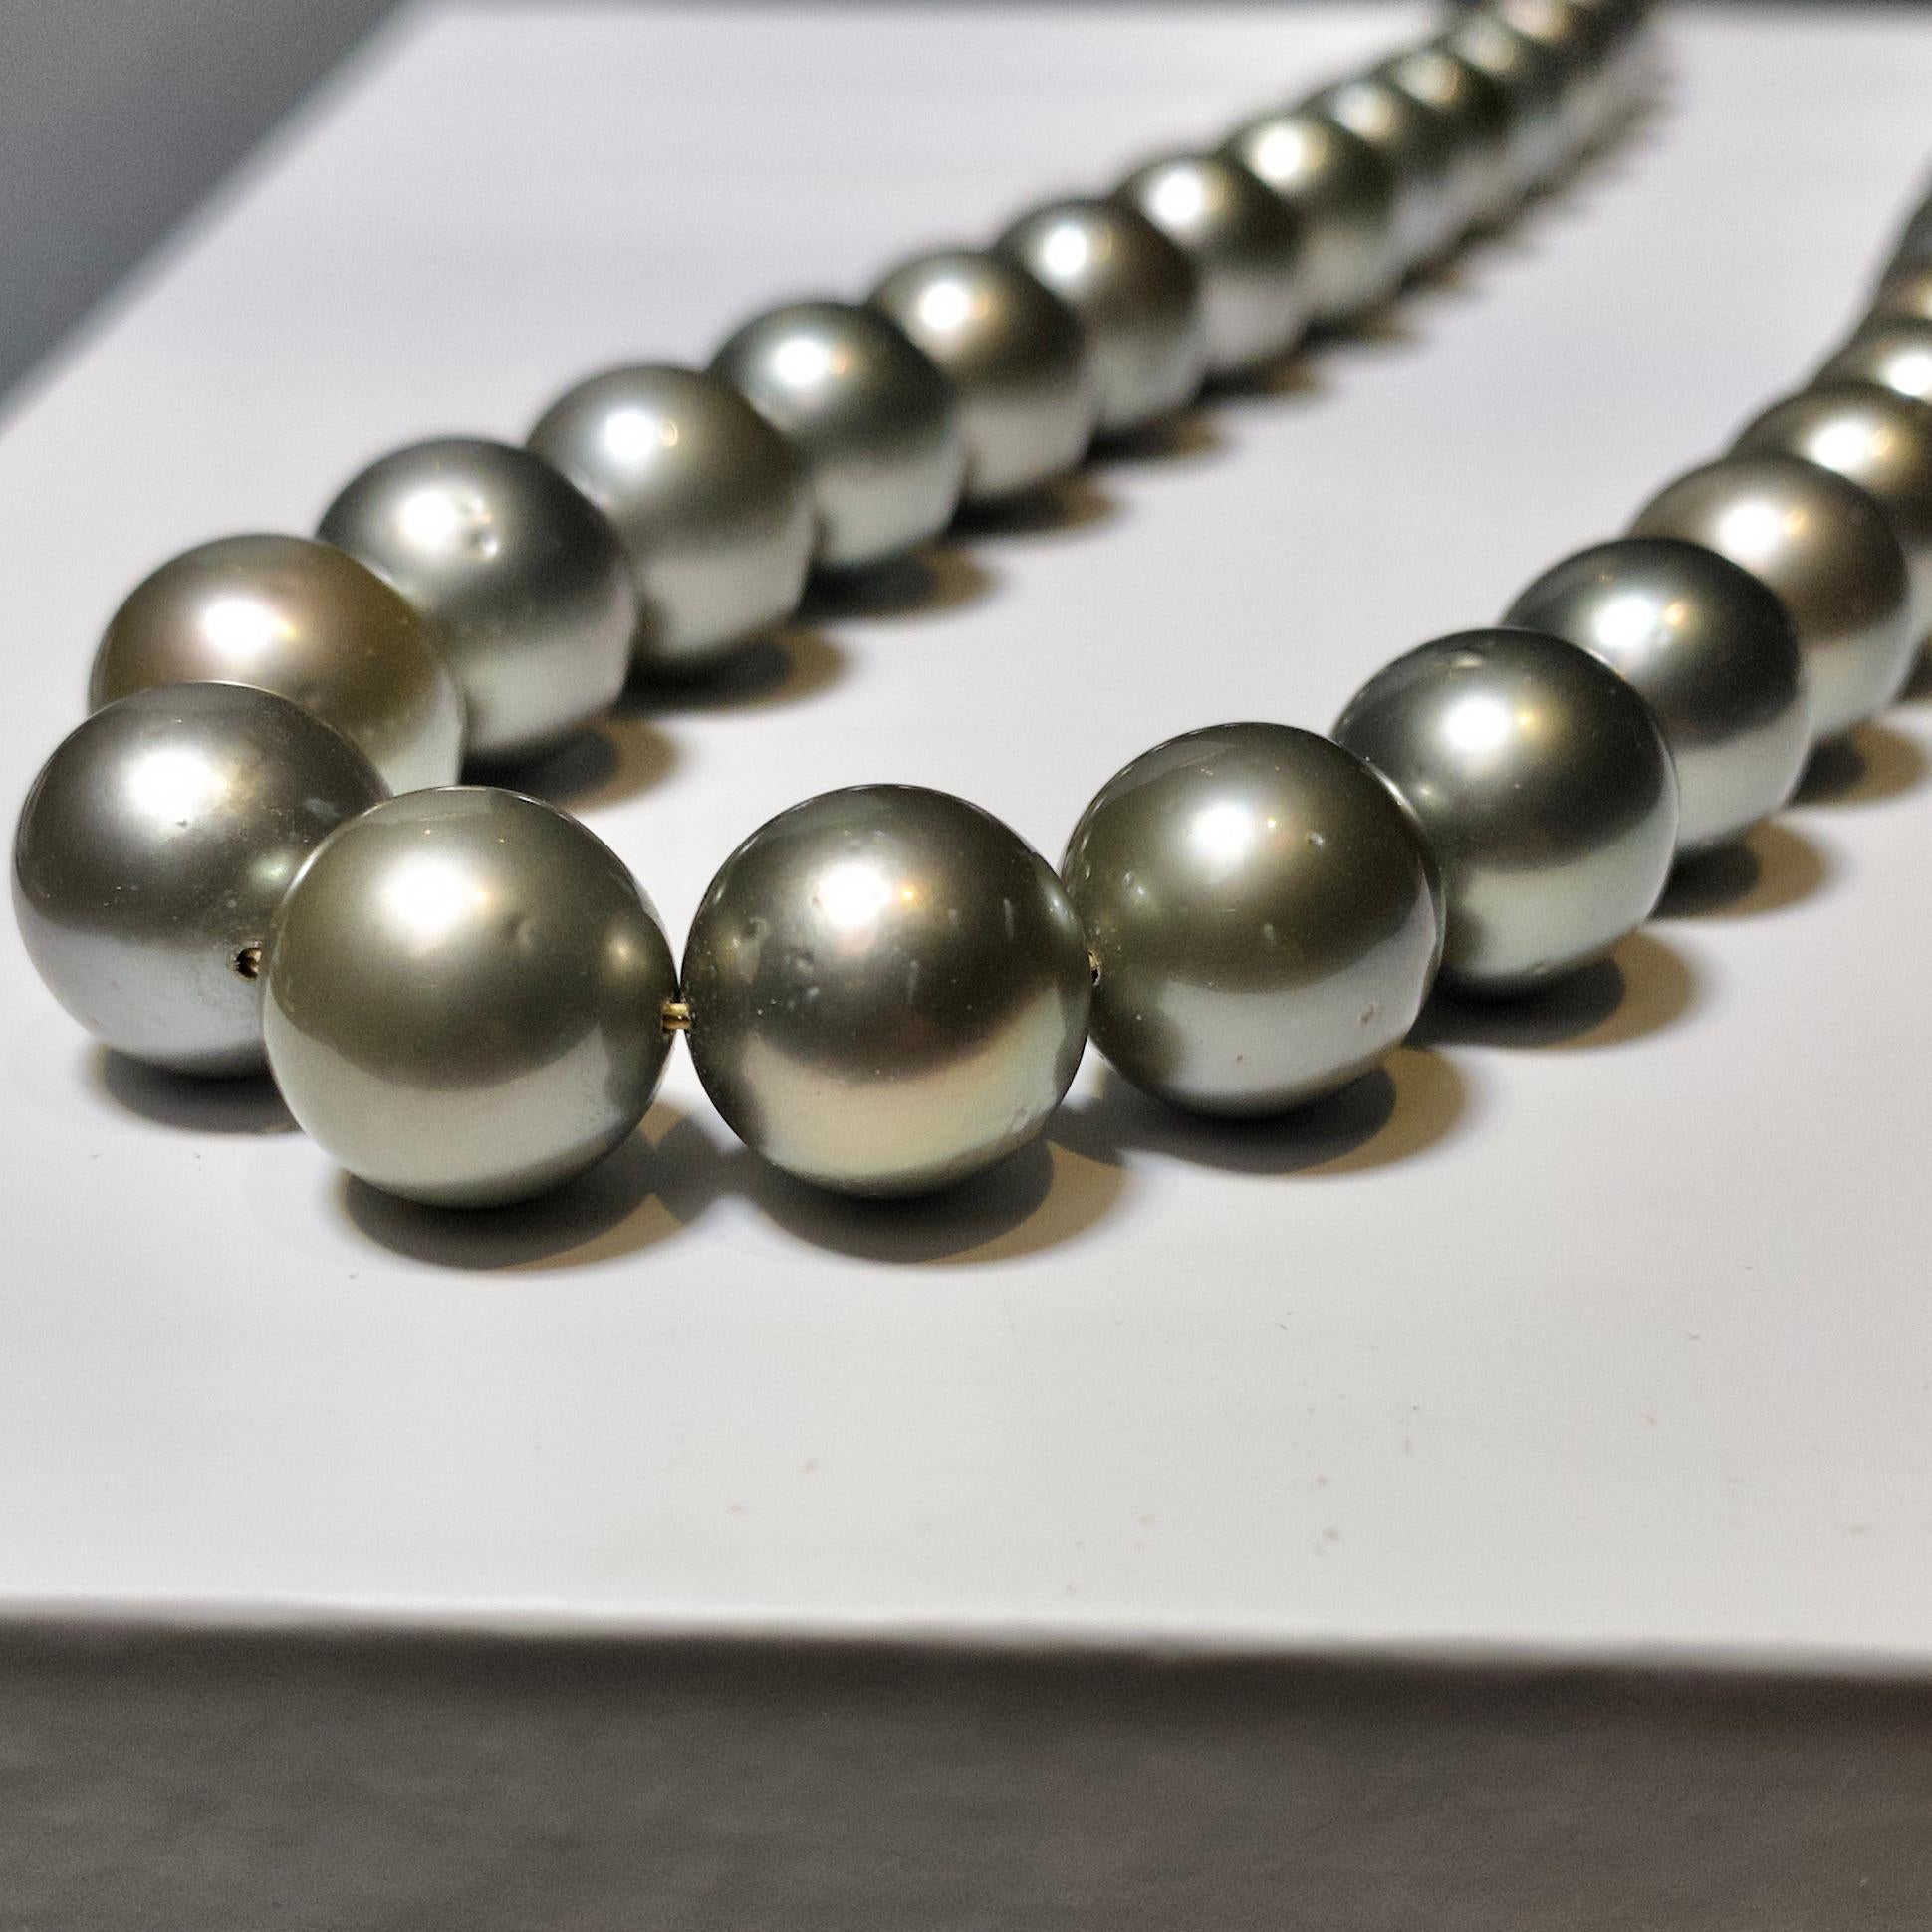 A Strand of Grey colour Silver tone Tahitian pearl necklace with 18K Yellow Gold Clasp. The length of the necklace is 77cm. We can alter the length of this necklace by adding or removing some pearls. please contact us if you want a different length.